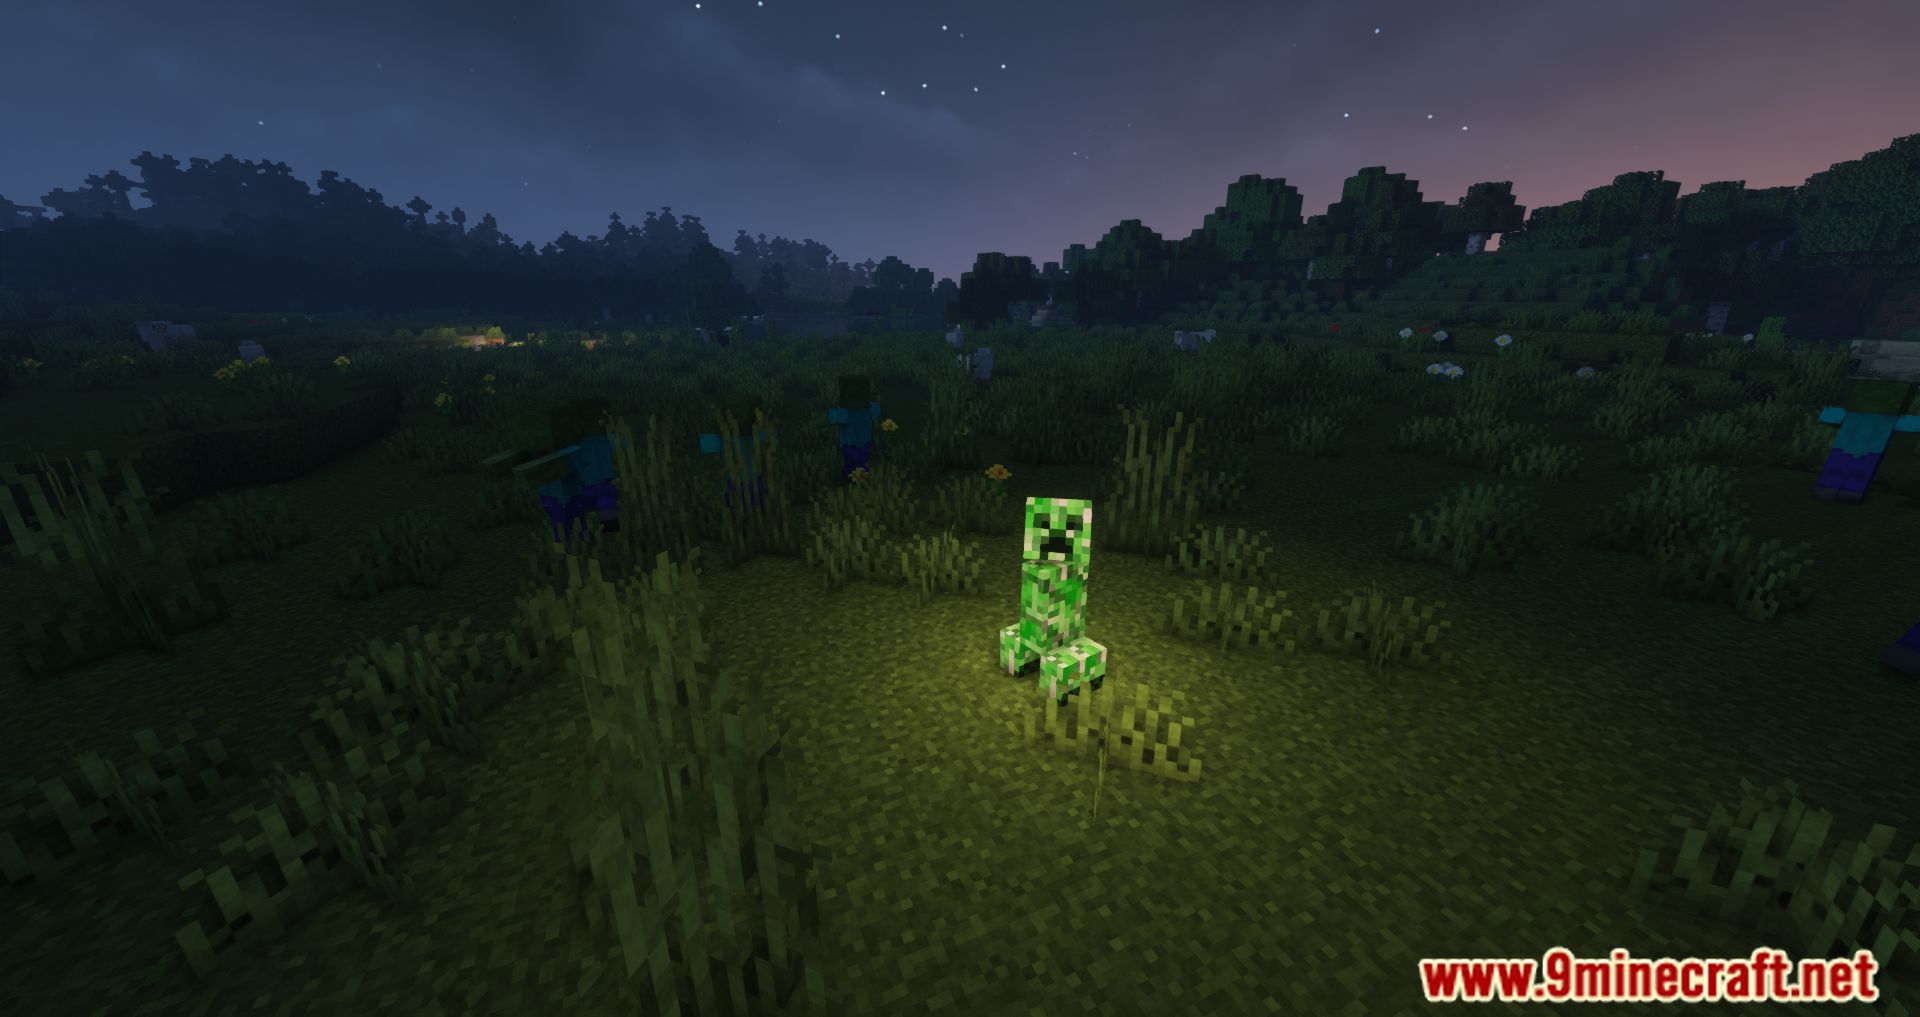 Well-Behaved Mobs Mod (1.16.5, 1.15.2) - Minor Tweaks To The Behavior Of A Few Mobs 7